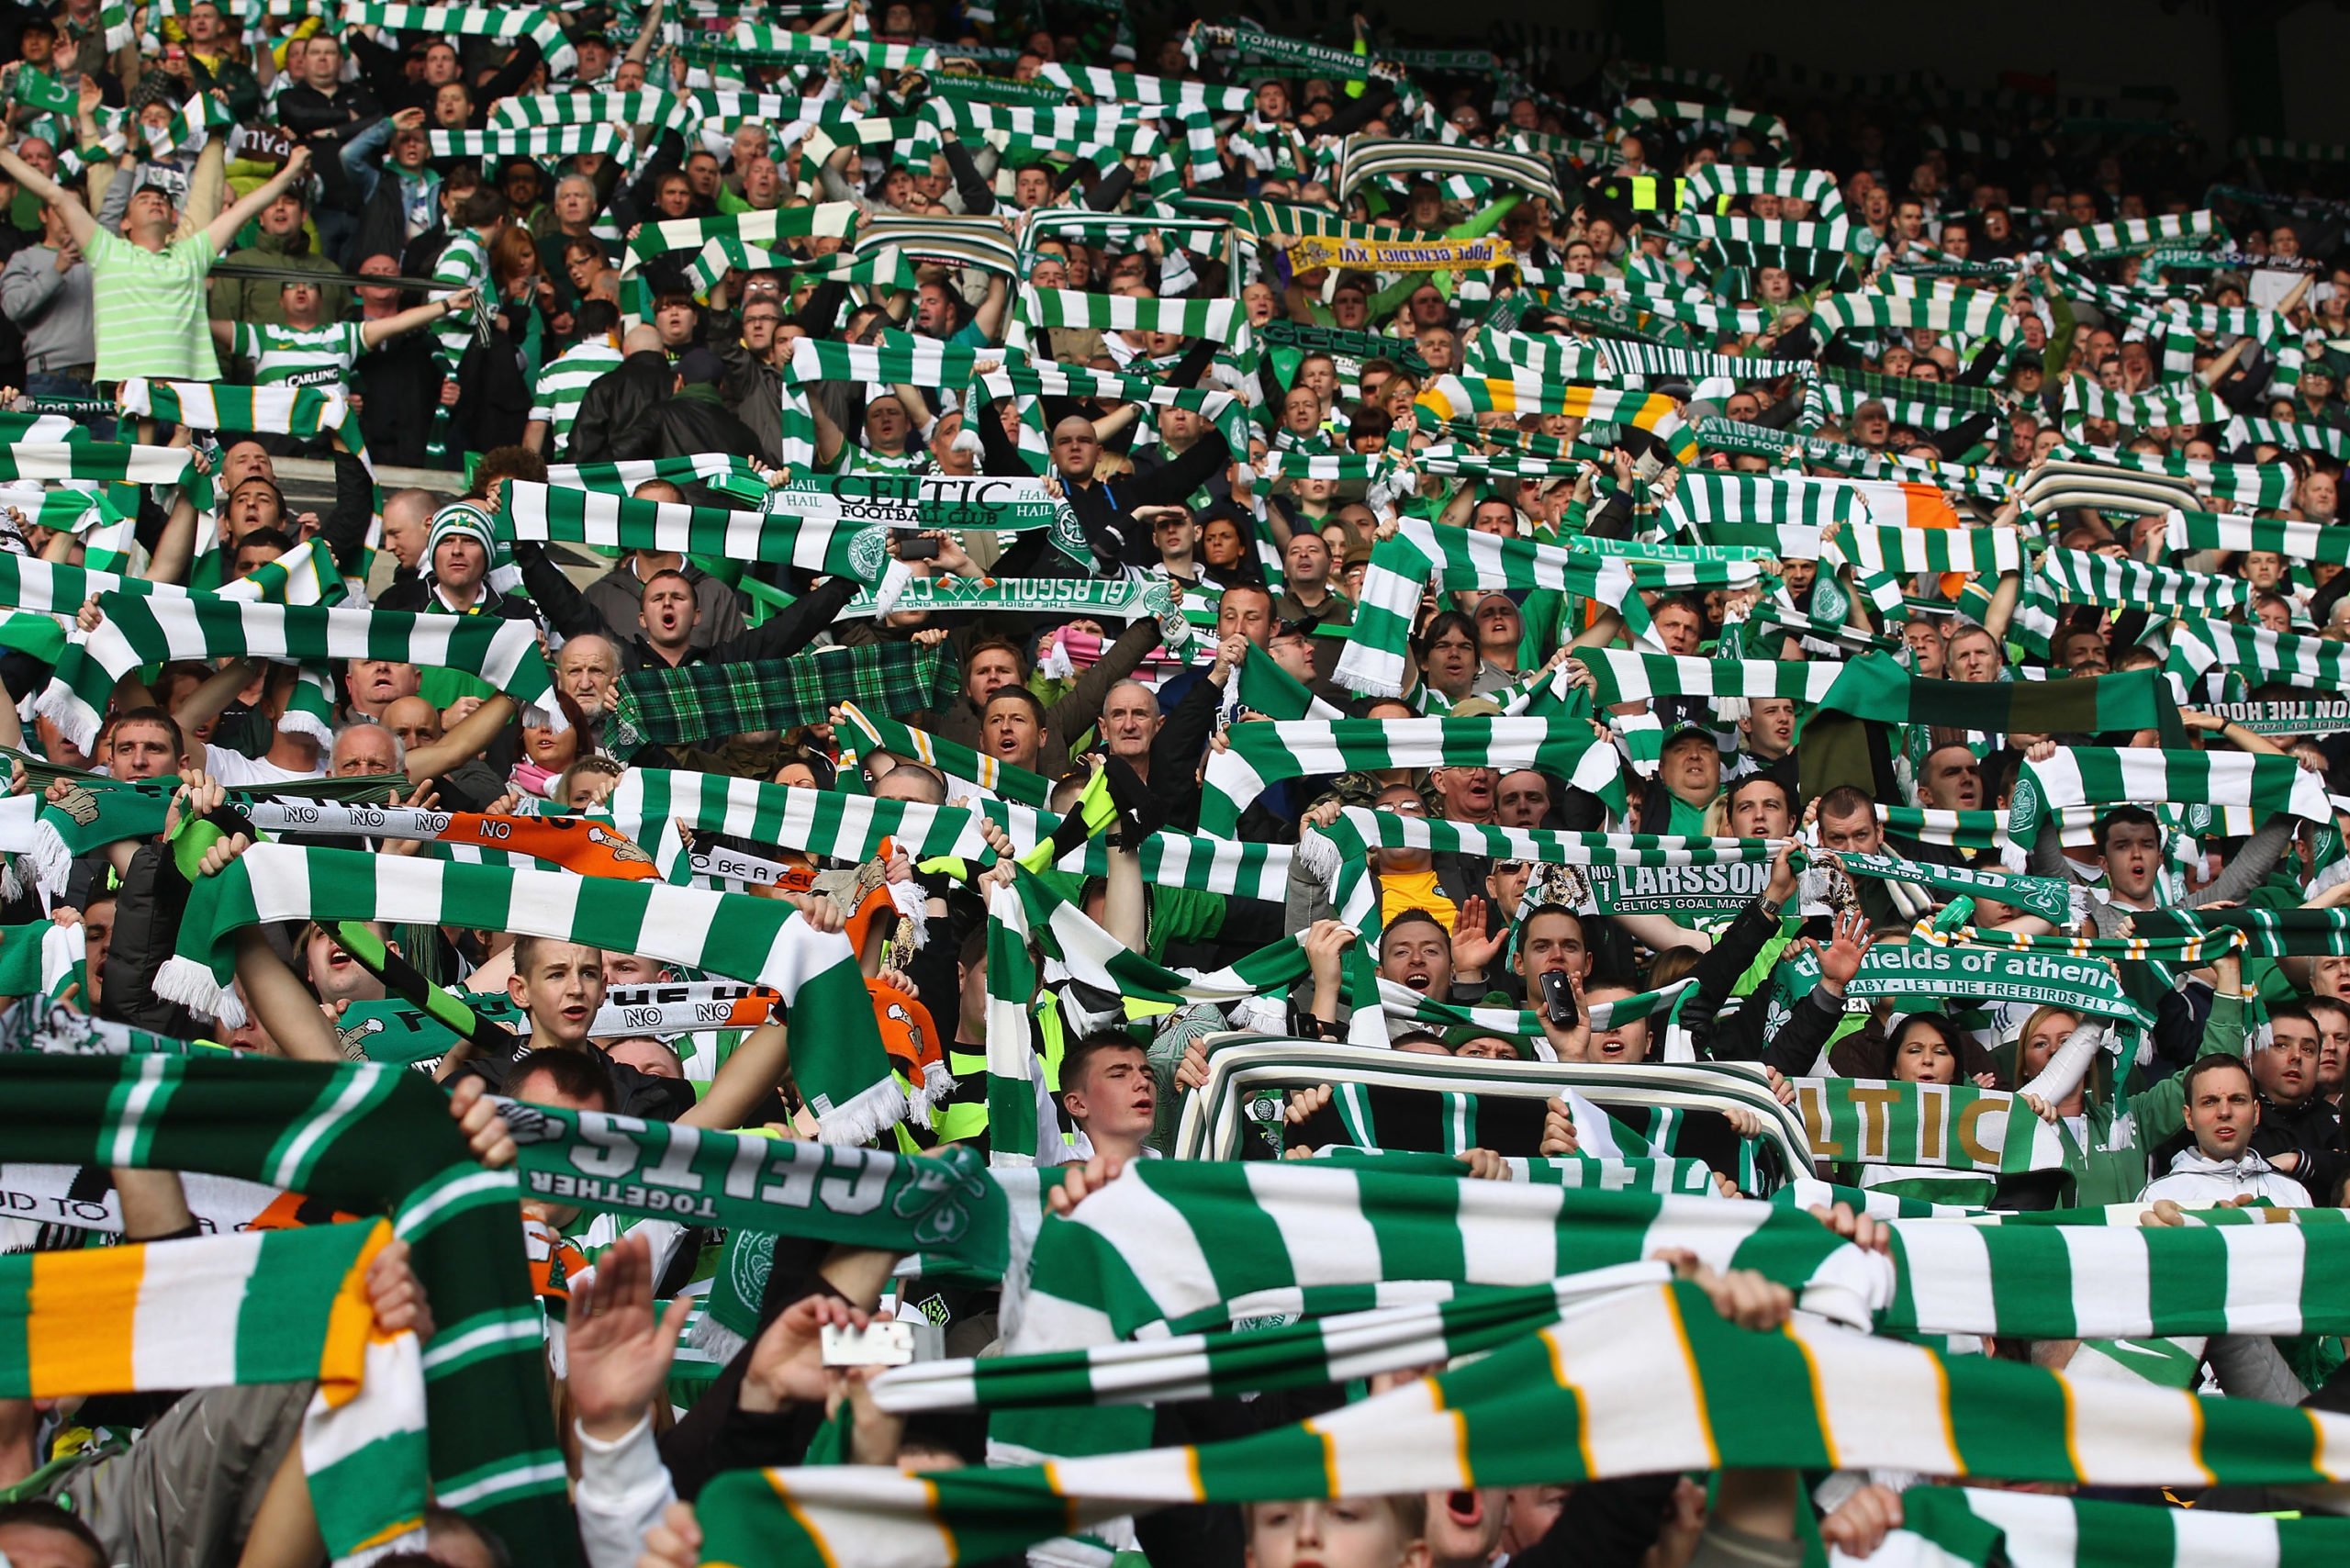 The last thing Celtic fans need: another dramatic Friday